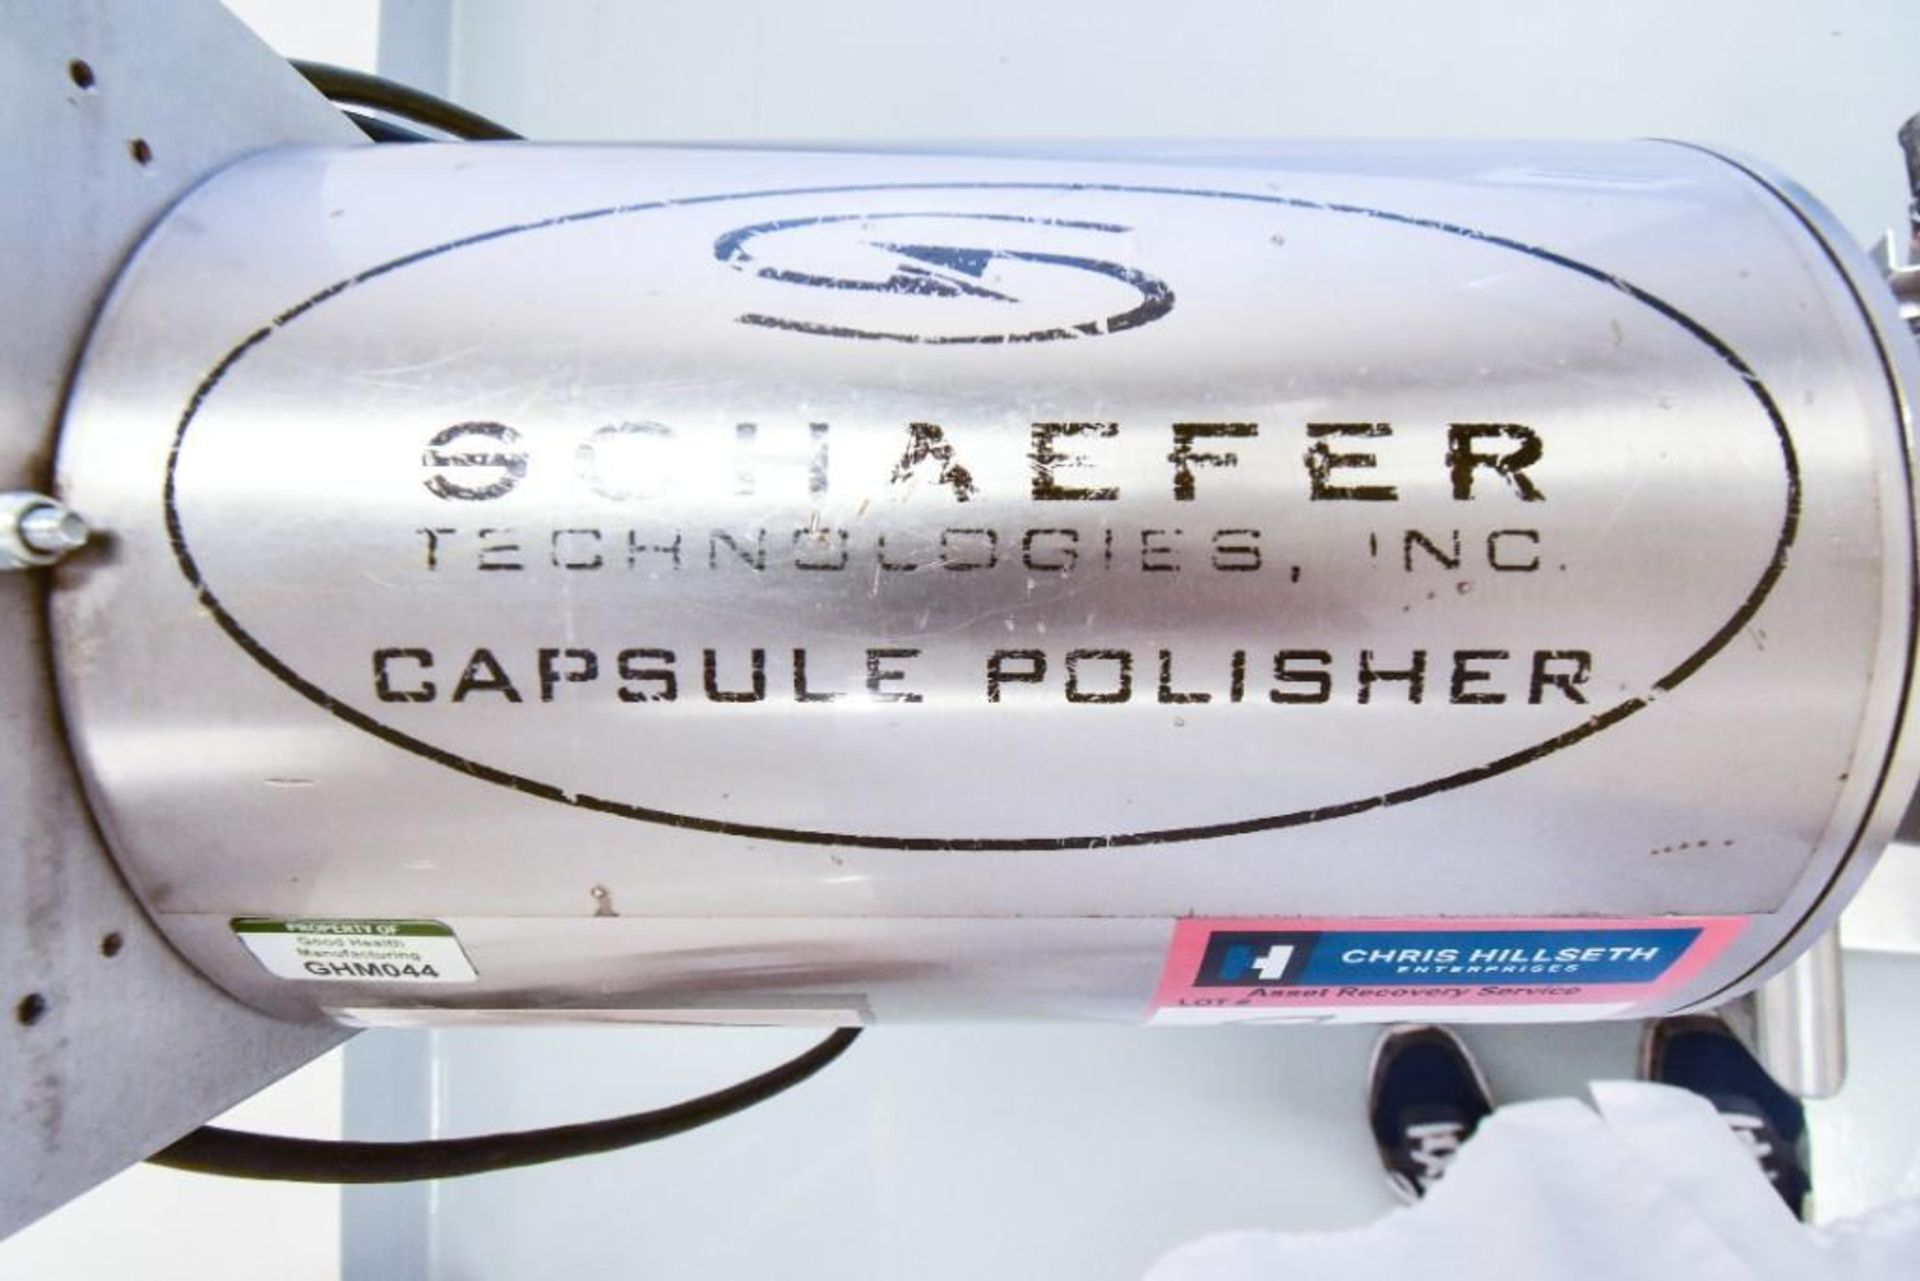 Schafer Capsule Polisher - Image 2 of 2